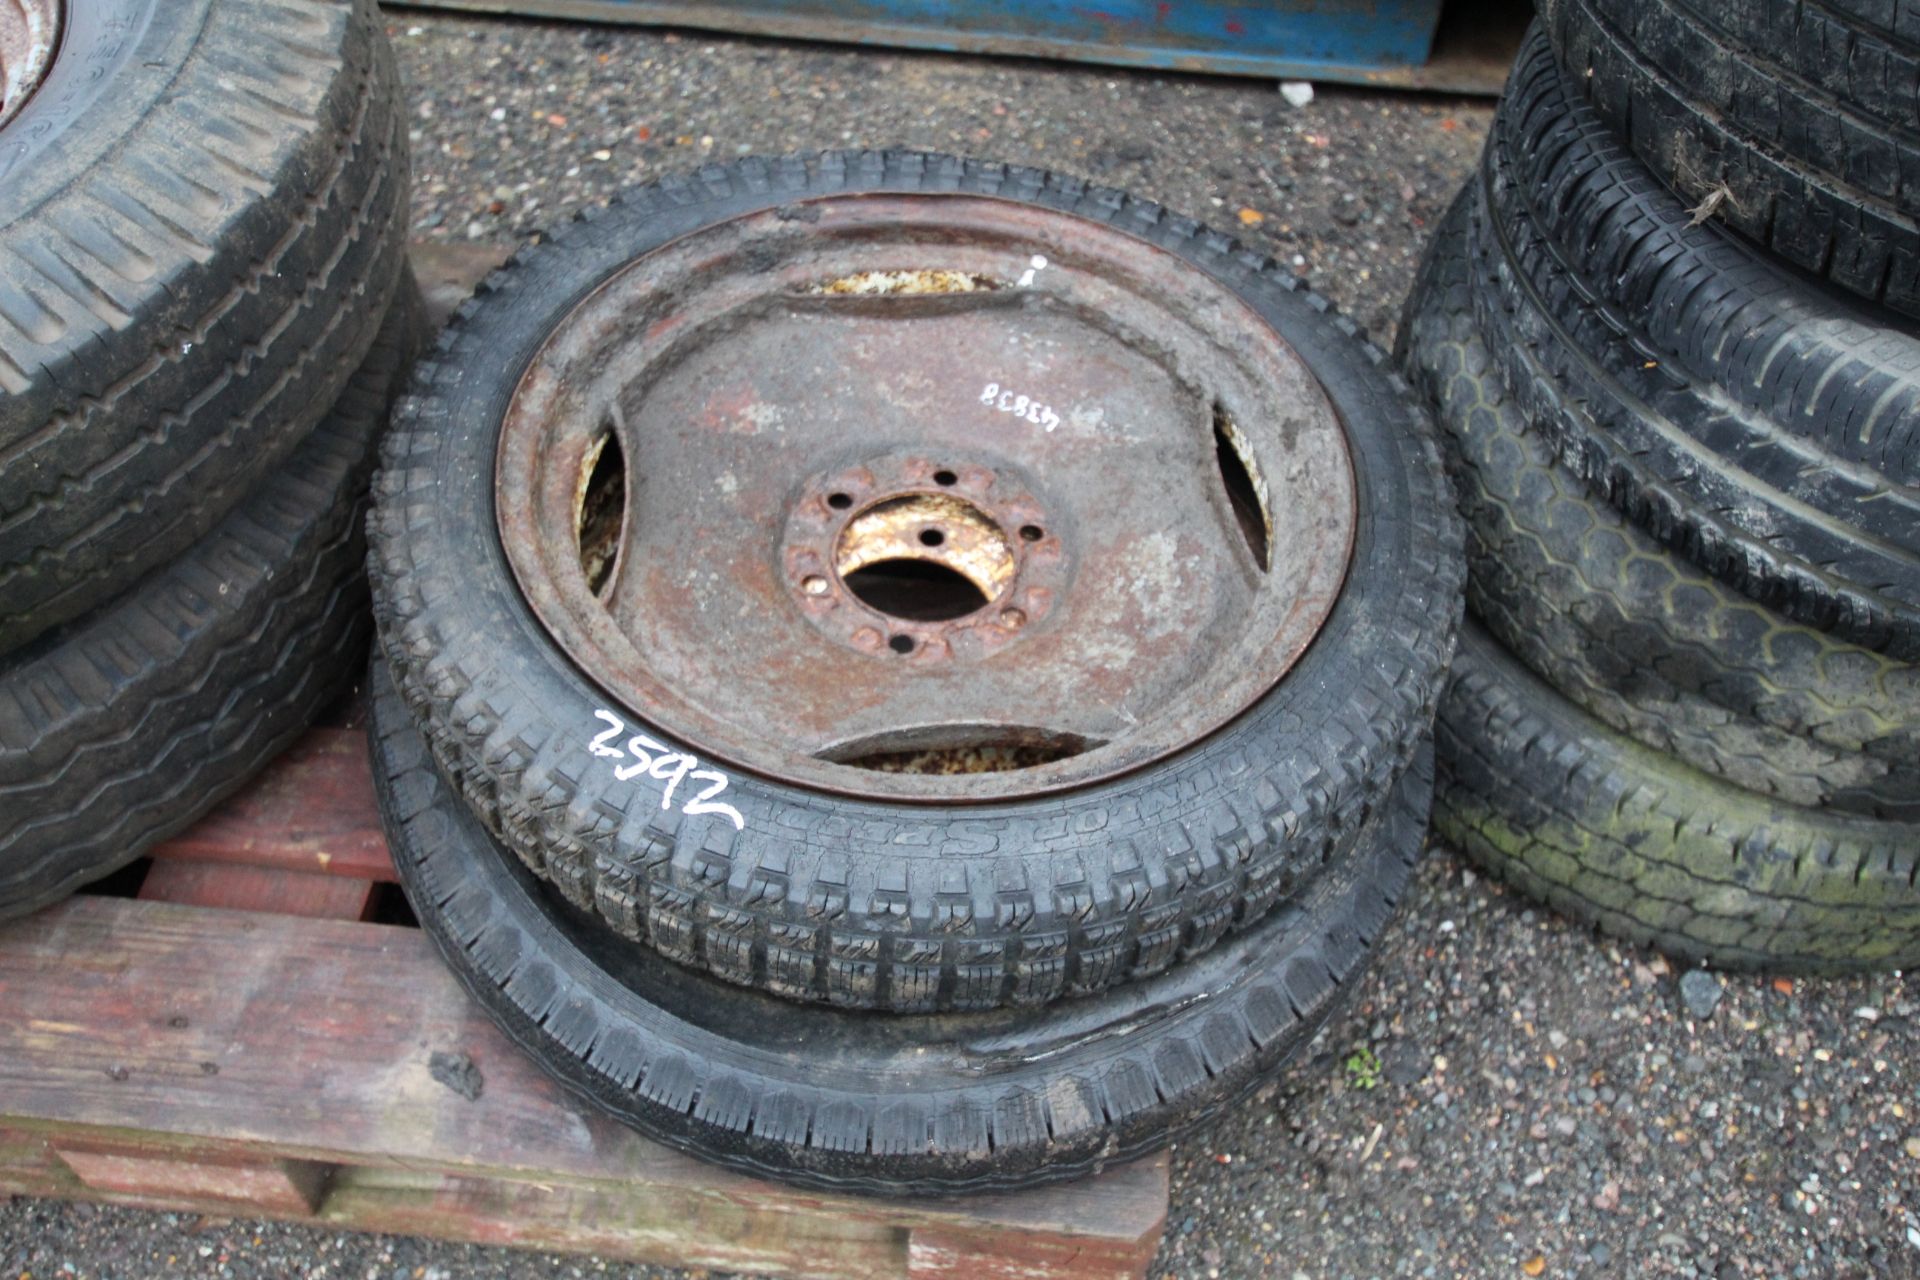 2x Ferguson front wheels and tyres. V